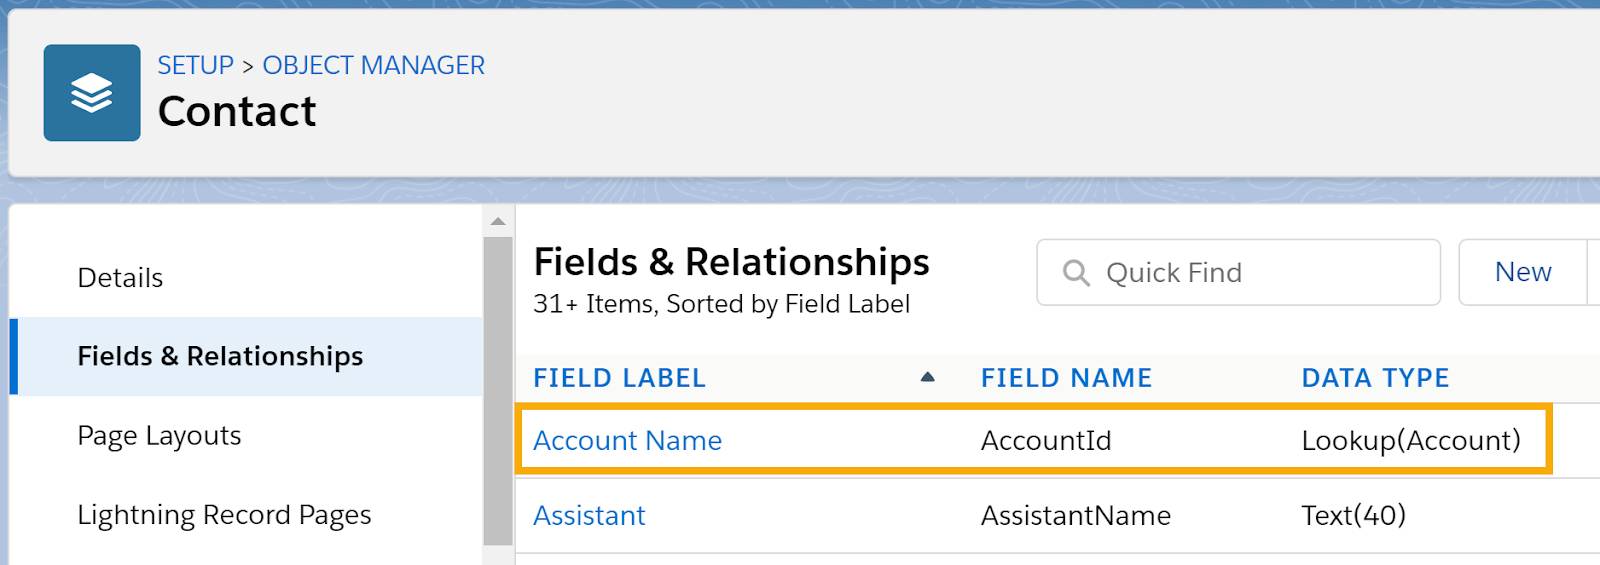 The Object Manager's Fields & Relationships page for the Contact object, highlighting one field. Field Label = Account Name. Field Name = AccountId. Data Type = Lookup(Account).